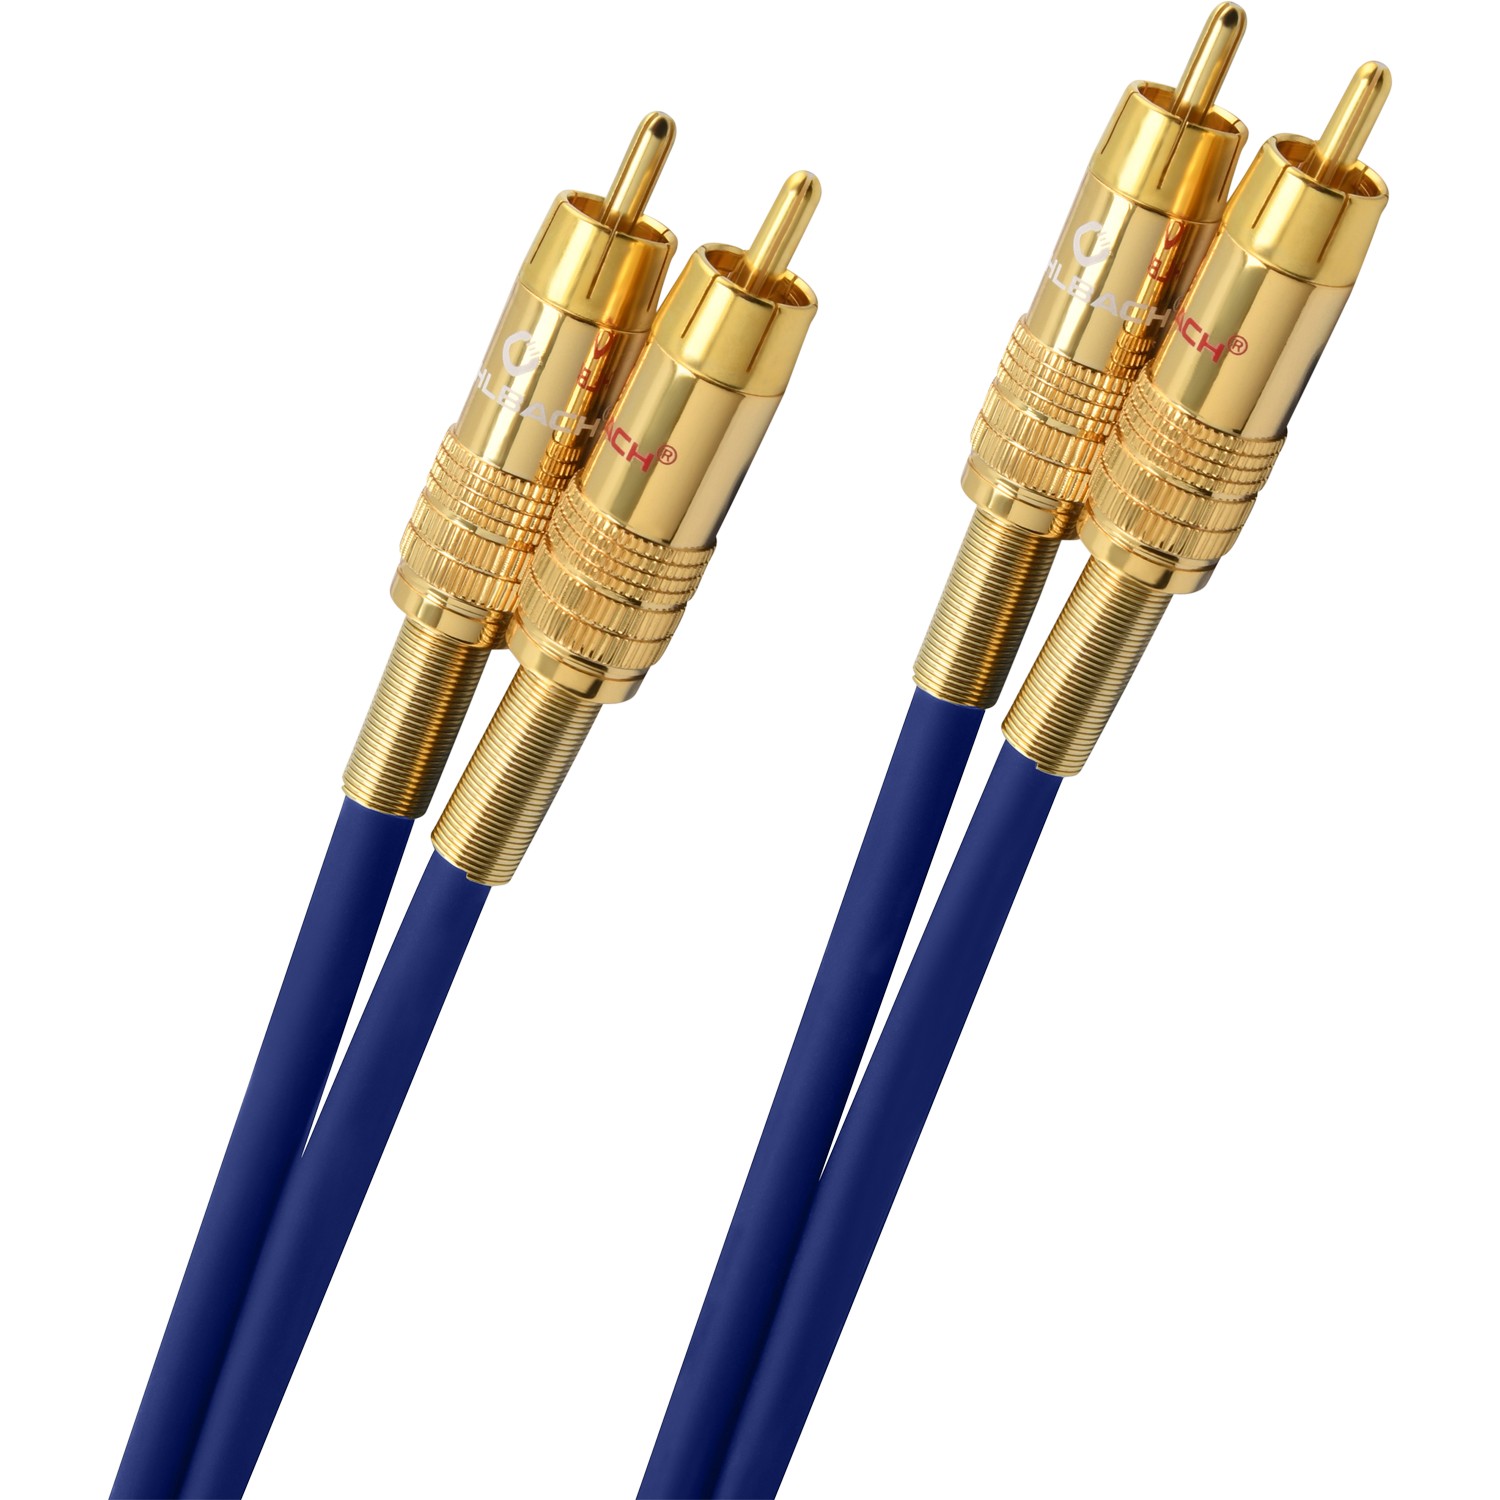 Кабели межблочные аудио Oehlbach PERFORMANCE NF 1 Master Set 1 x 10m, blue, D1C2039 кабели межблочные аудио oehlbach state of the art xxl cable rca 2x2 00m gold d1c13116